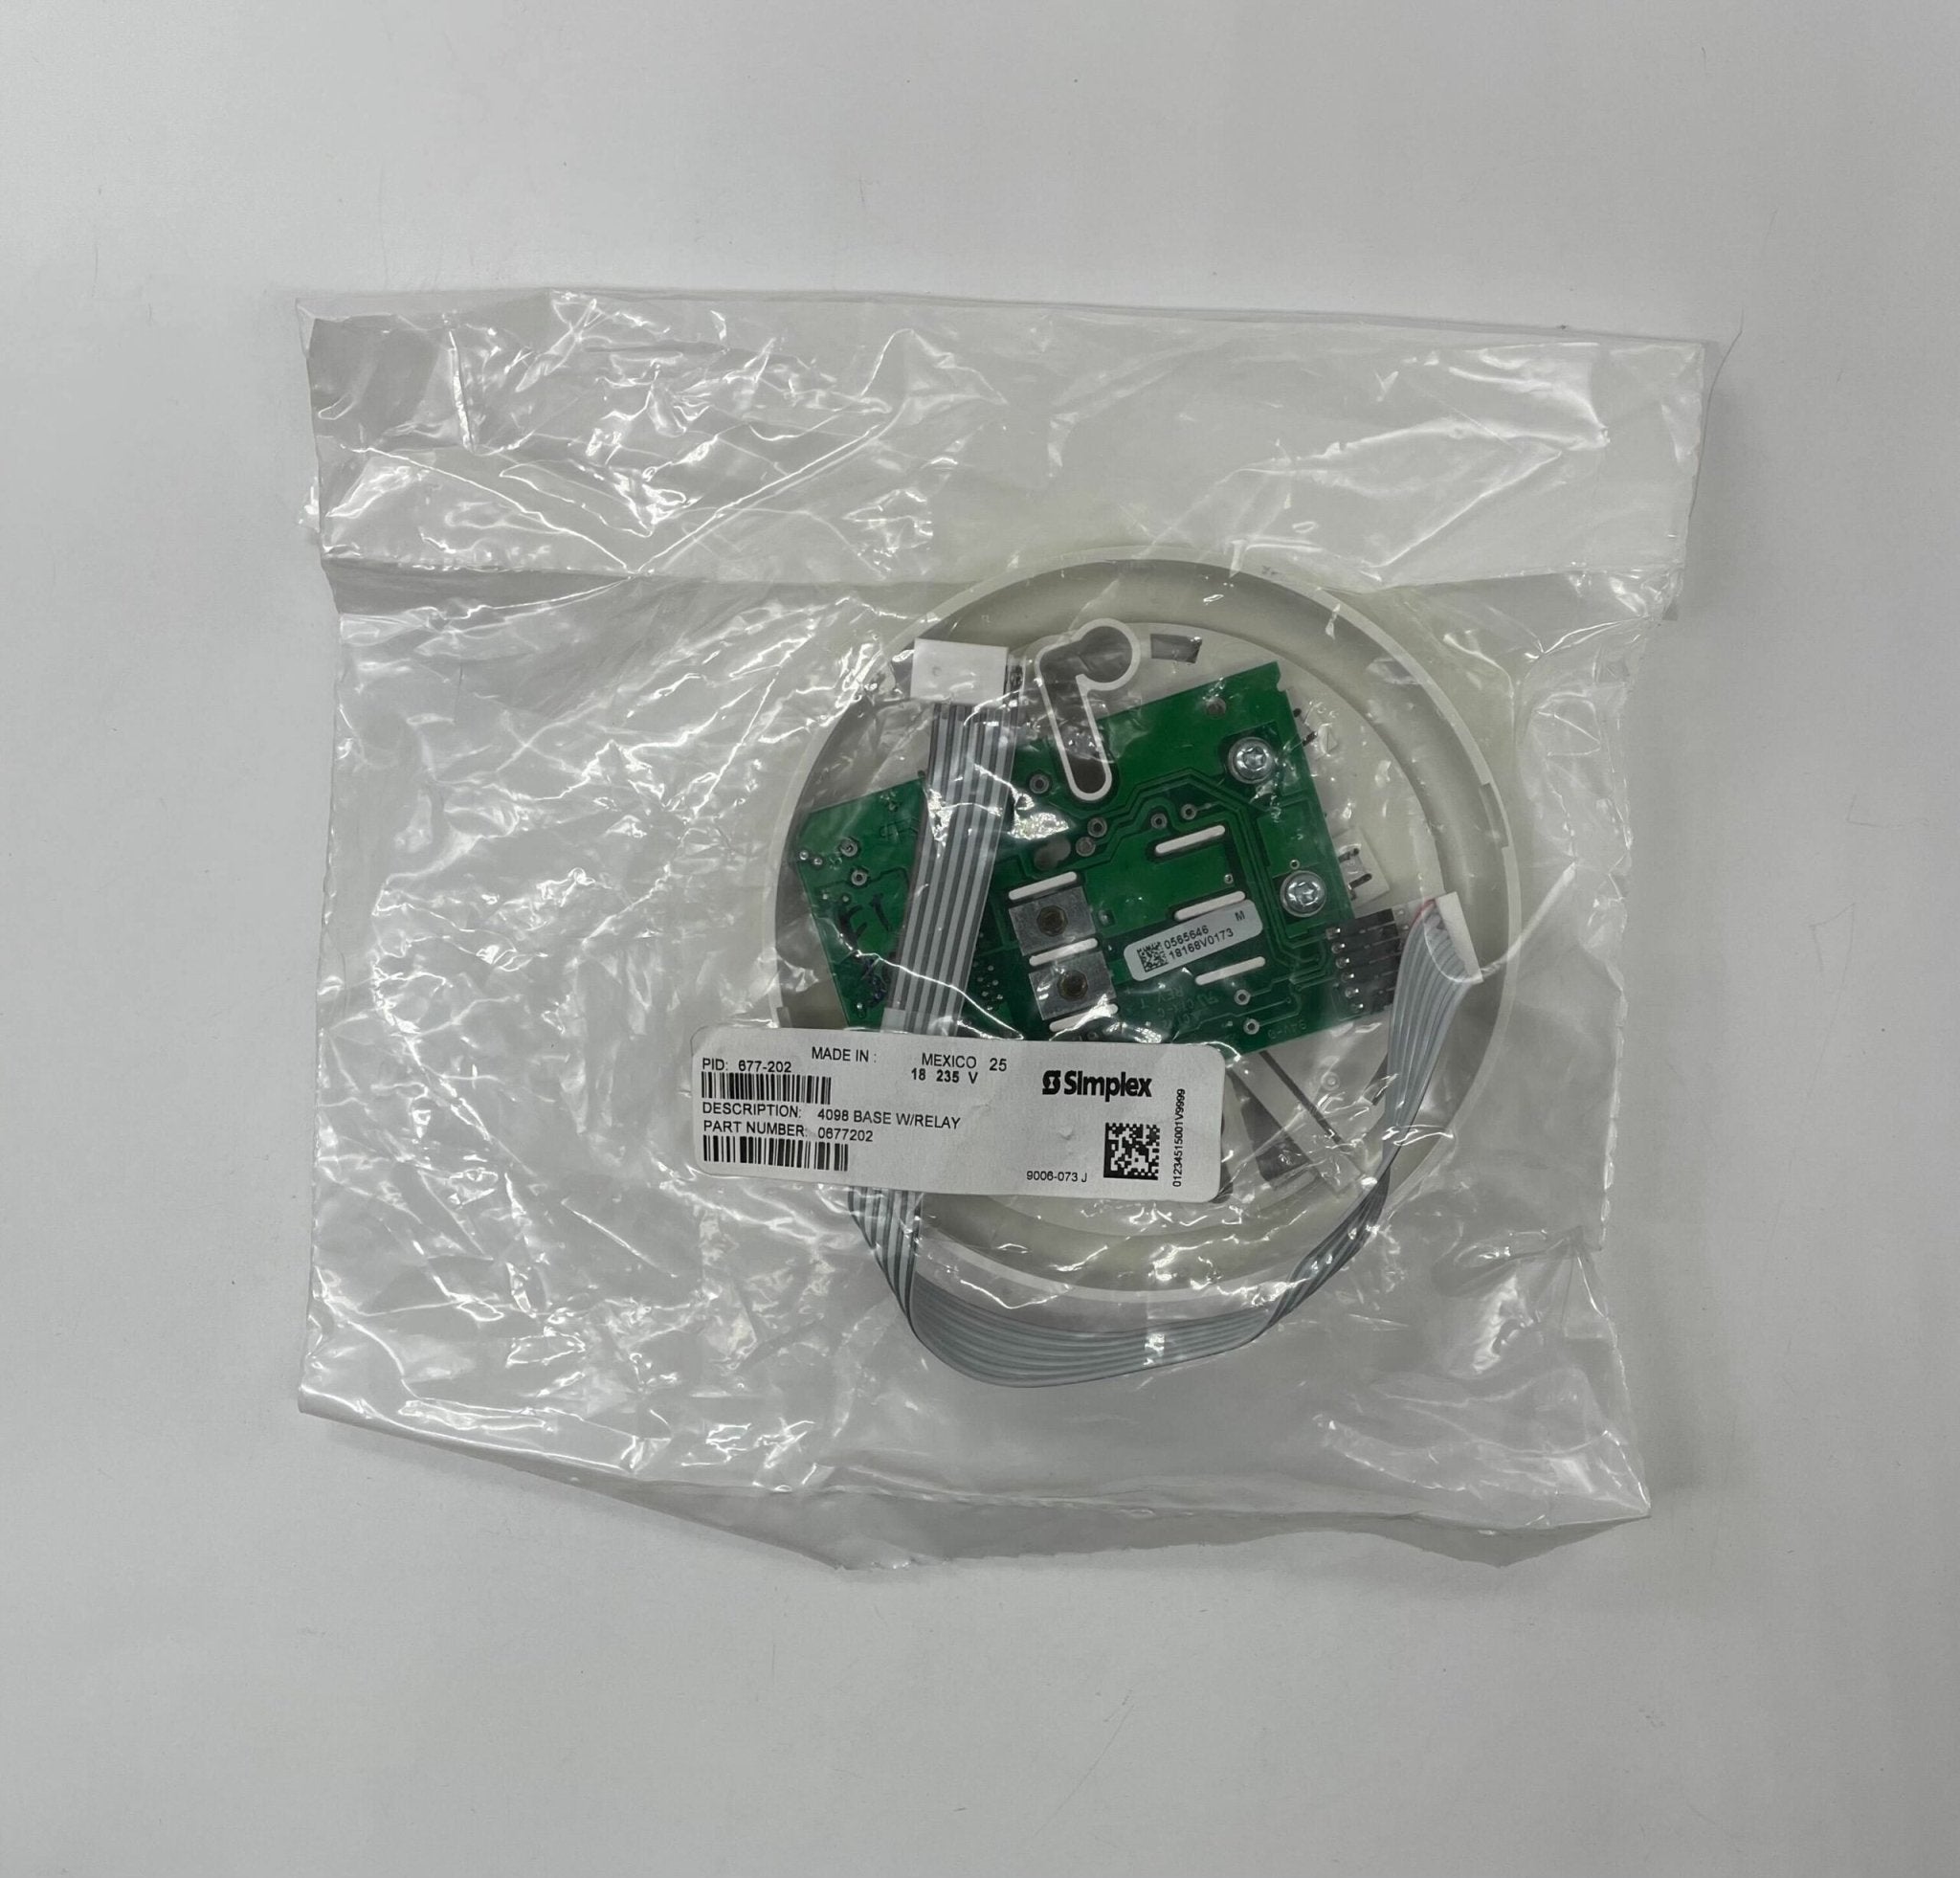 Simplex 677-202 Base With Relay - The Fire Alarm Supplier